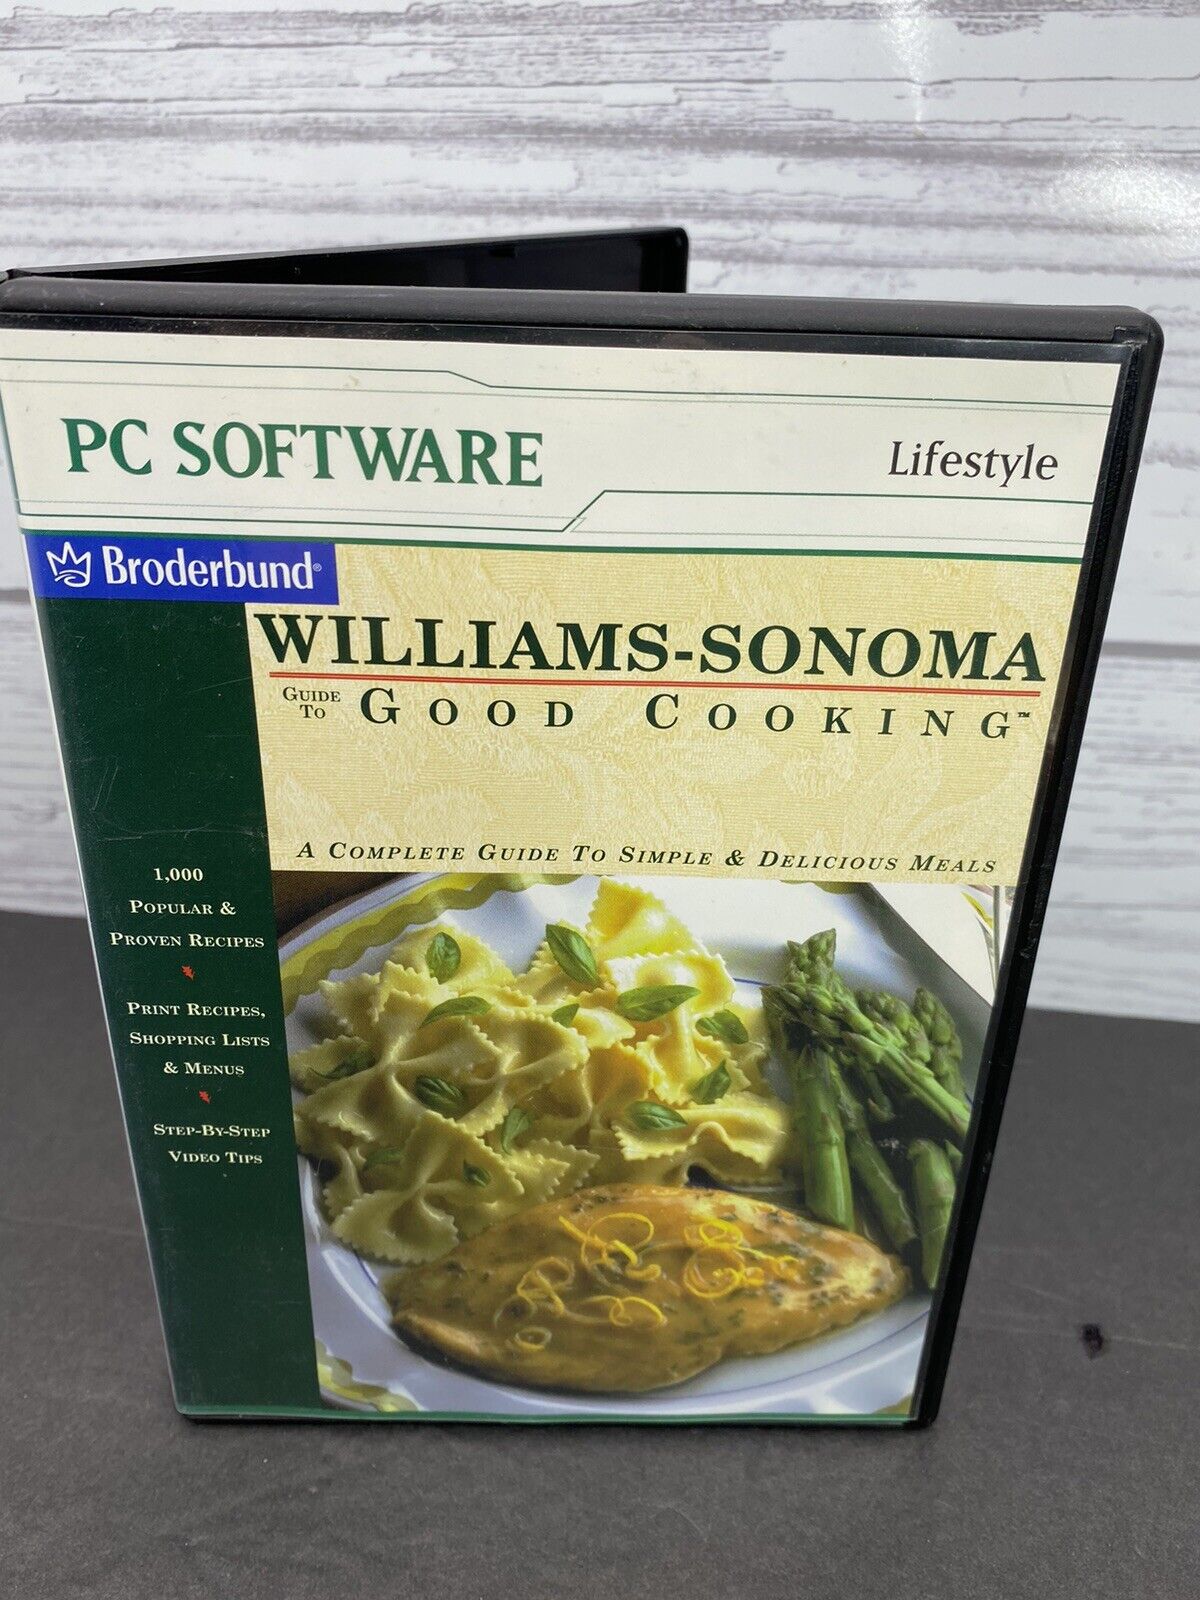 Williams Sonoma PC COMPUTER SOFTWARE Broderbund guide to Good Cooking CD-ROM